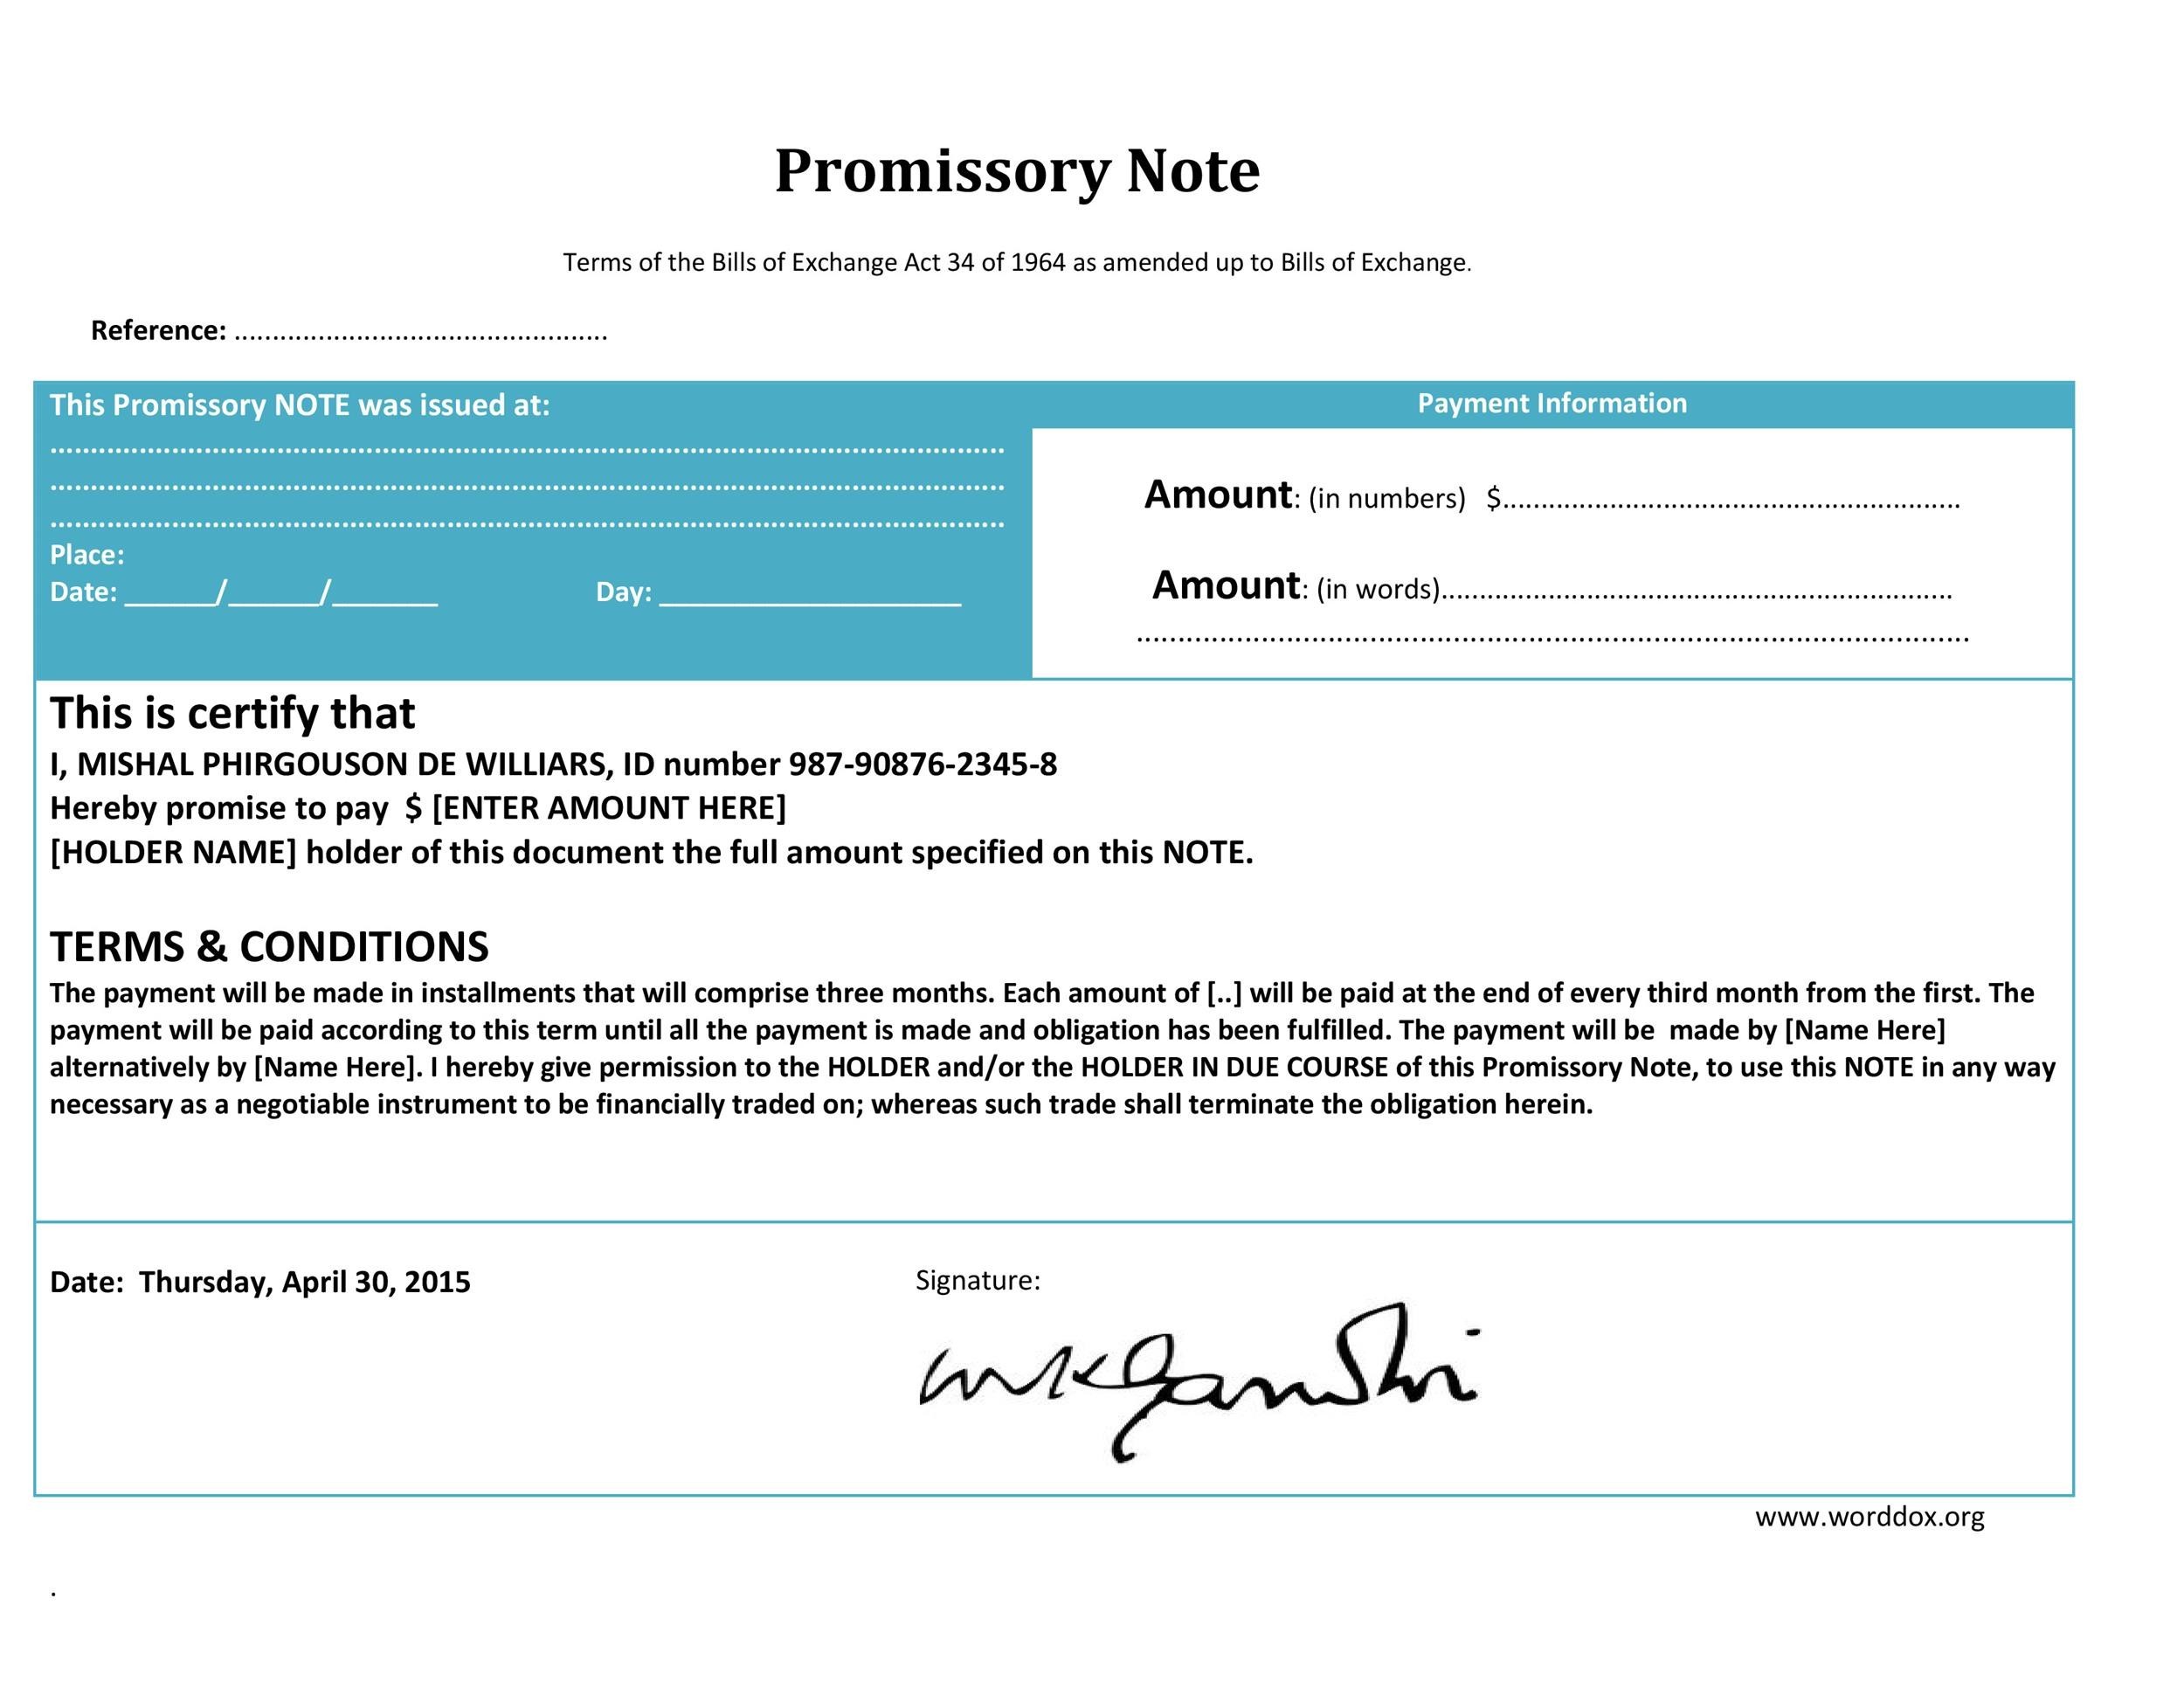 45 FREE Promissory Note Templates & Forms [Word & PDF] Template Lab